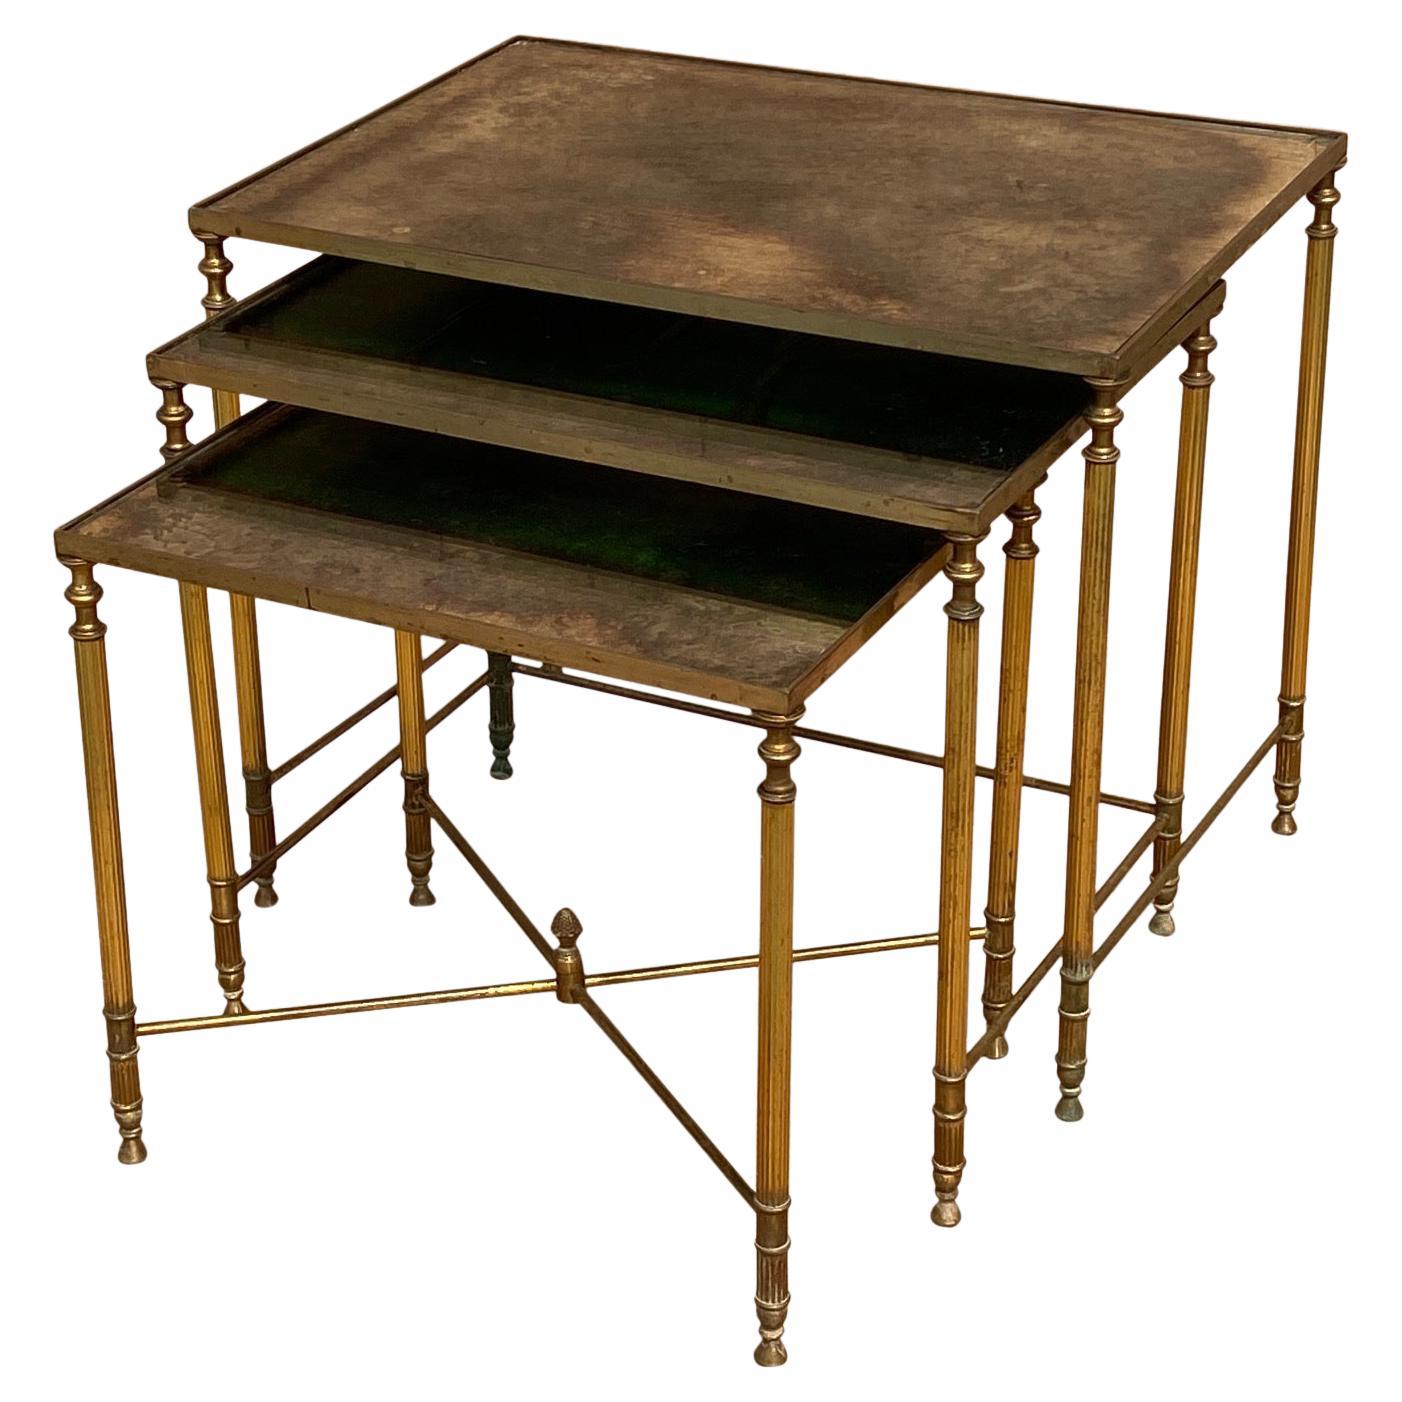 20th Century Nest of 3 Brass Tables with Gold Leaf Glass Tops